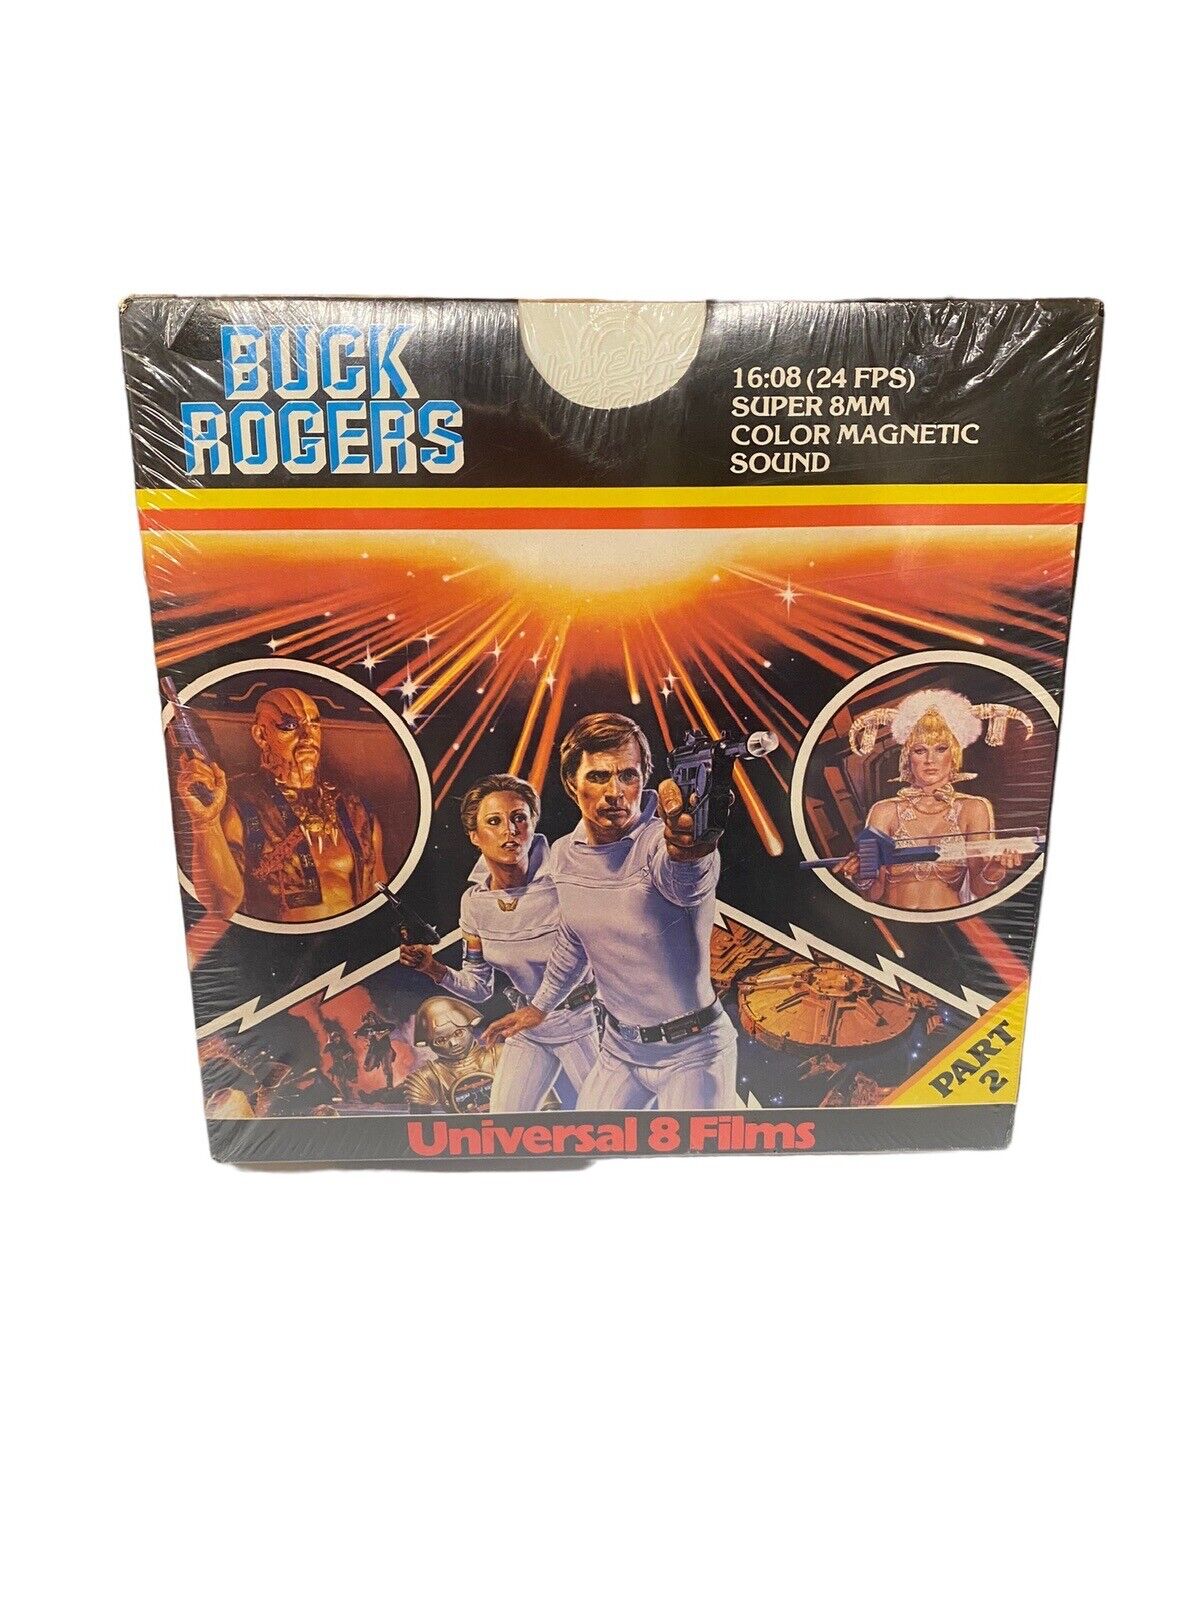 Buck Rogers in the 25th Century (color sound) 8MM Universal 8 Films (sealed)